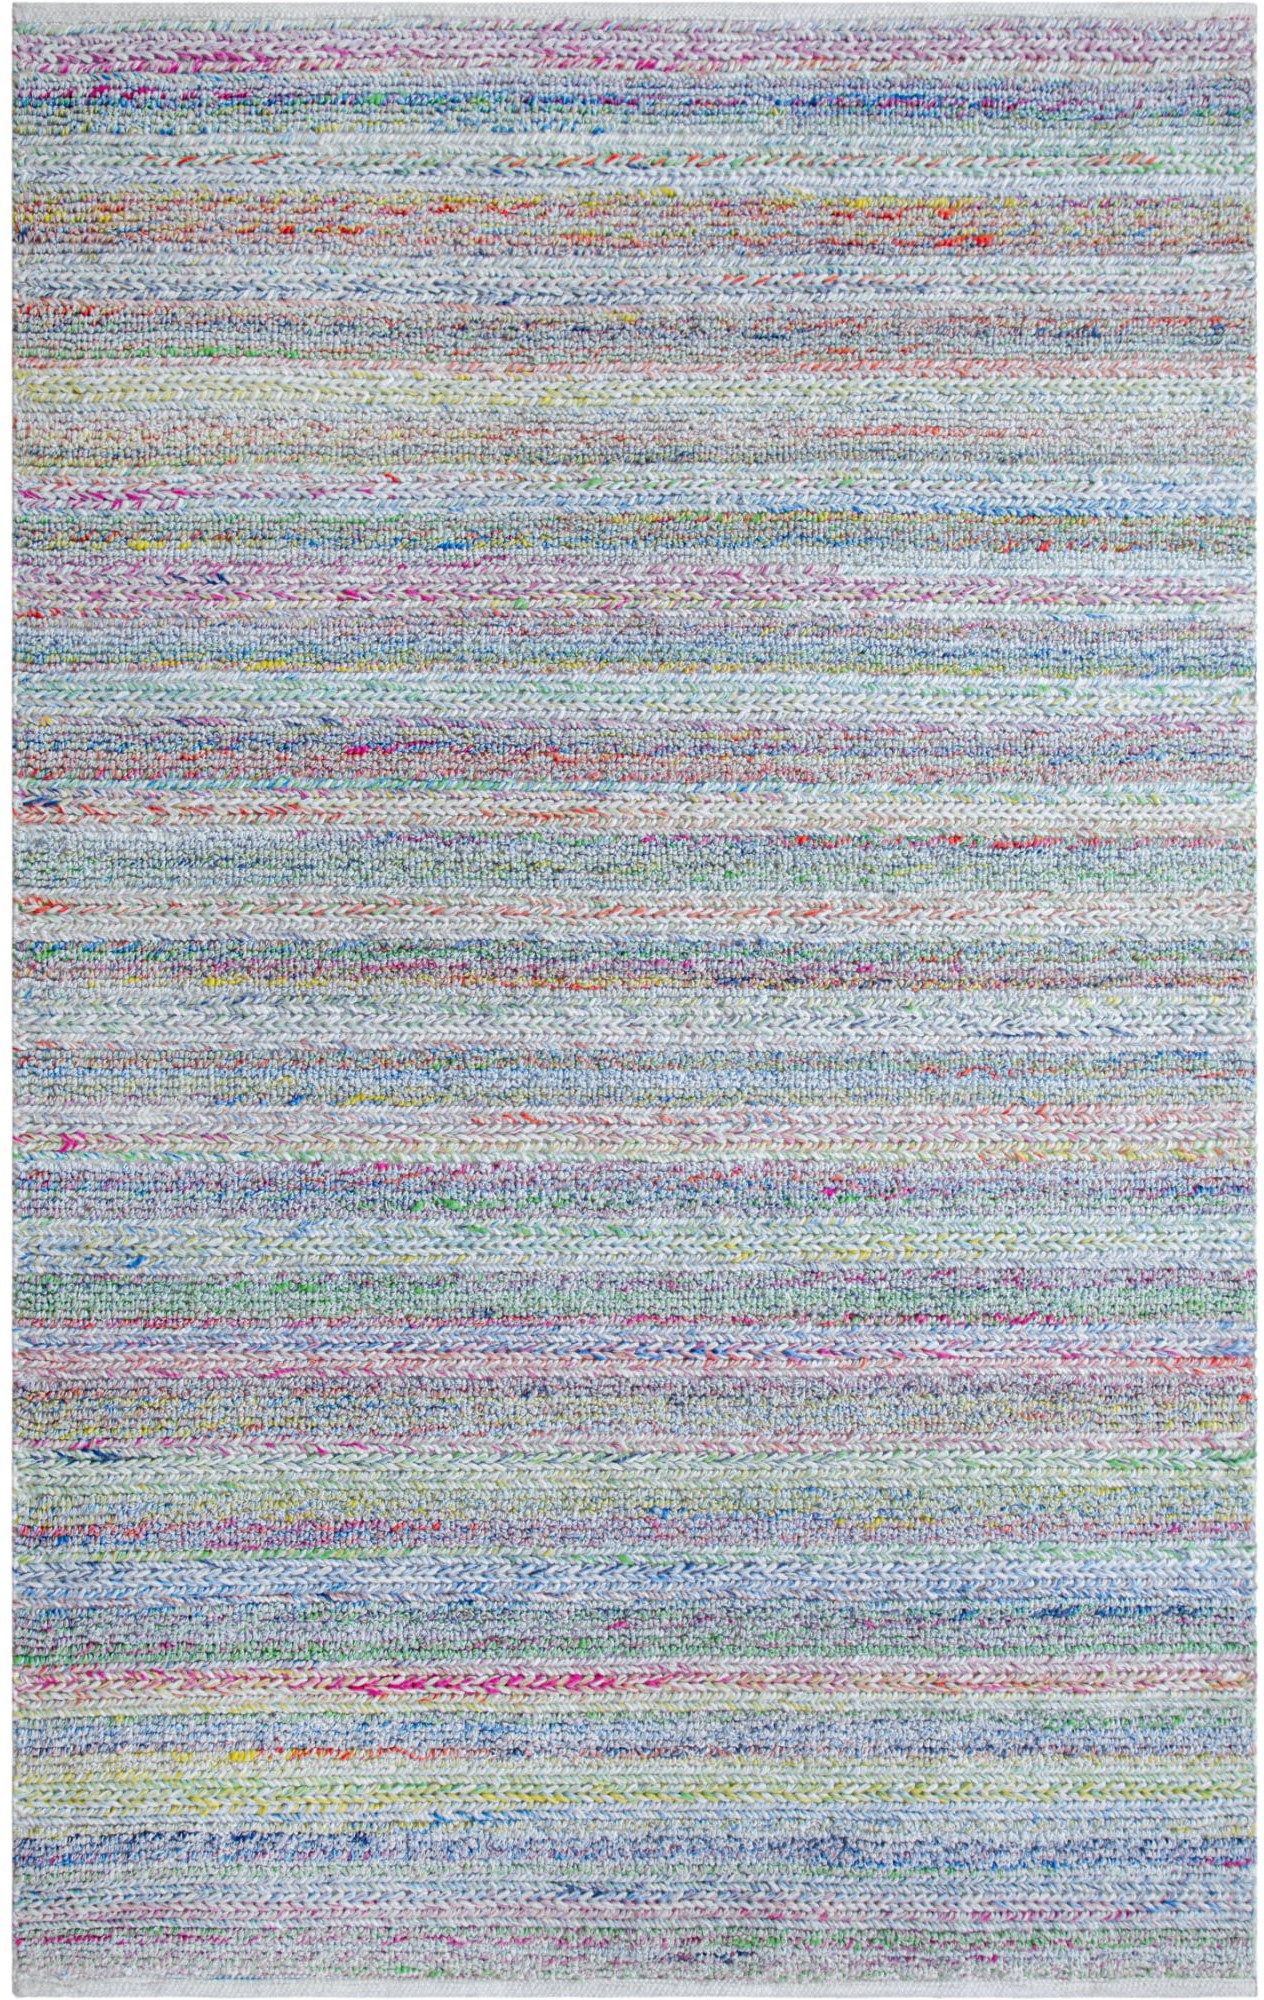 Company C Confetti 11005 Contemporary / Modern Area Rugs | Rugs Direct With Regard To Finsbury Runner Rugs (View 13 of 15)